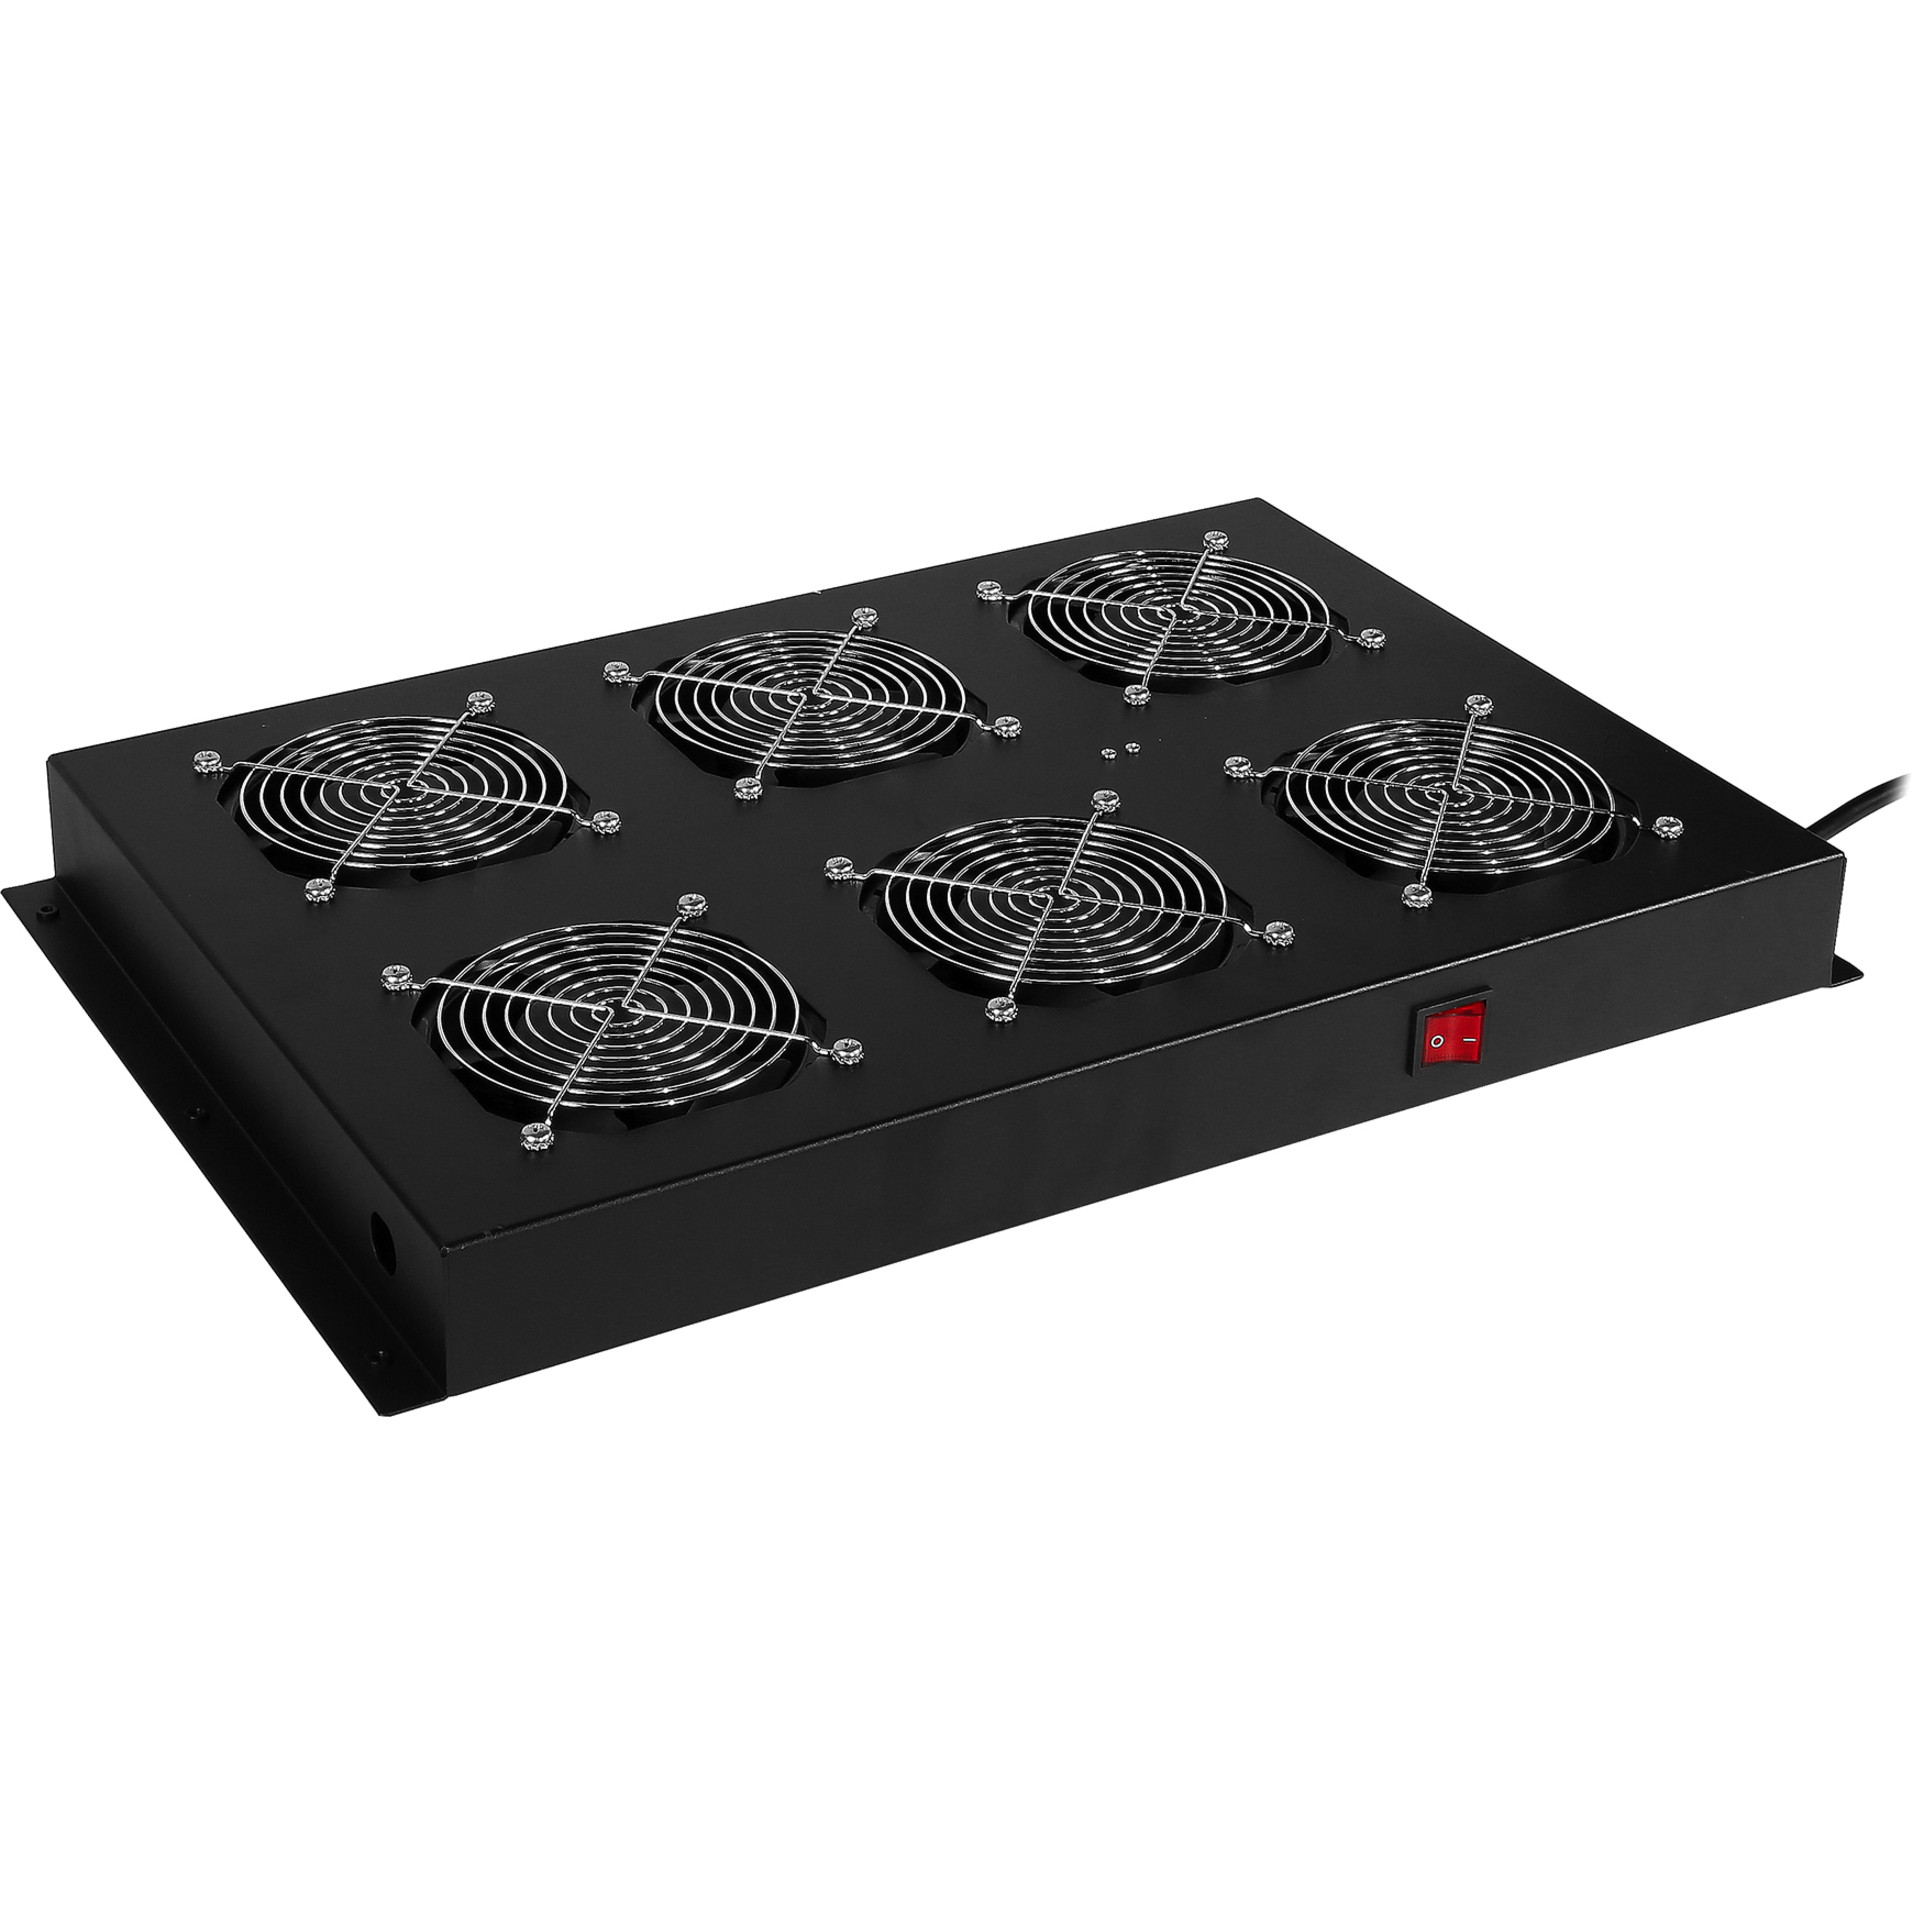 Cyber Power CRA12001 Roof fan panel Rack AccessoriesRoof-mounted fan panel, 6x 208/240Vac fans, for 42″ to 47″ (1070mm-1200mm) deep enclosure… CRA12001